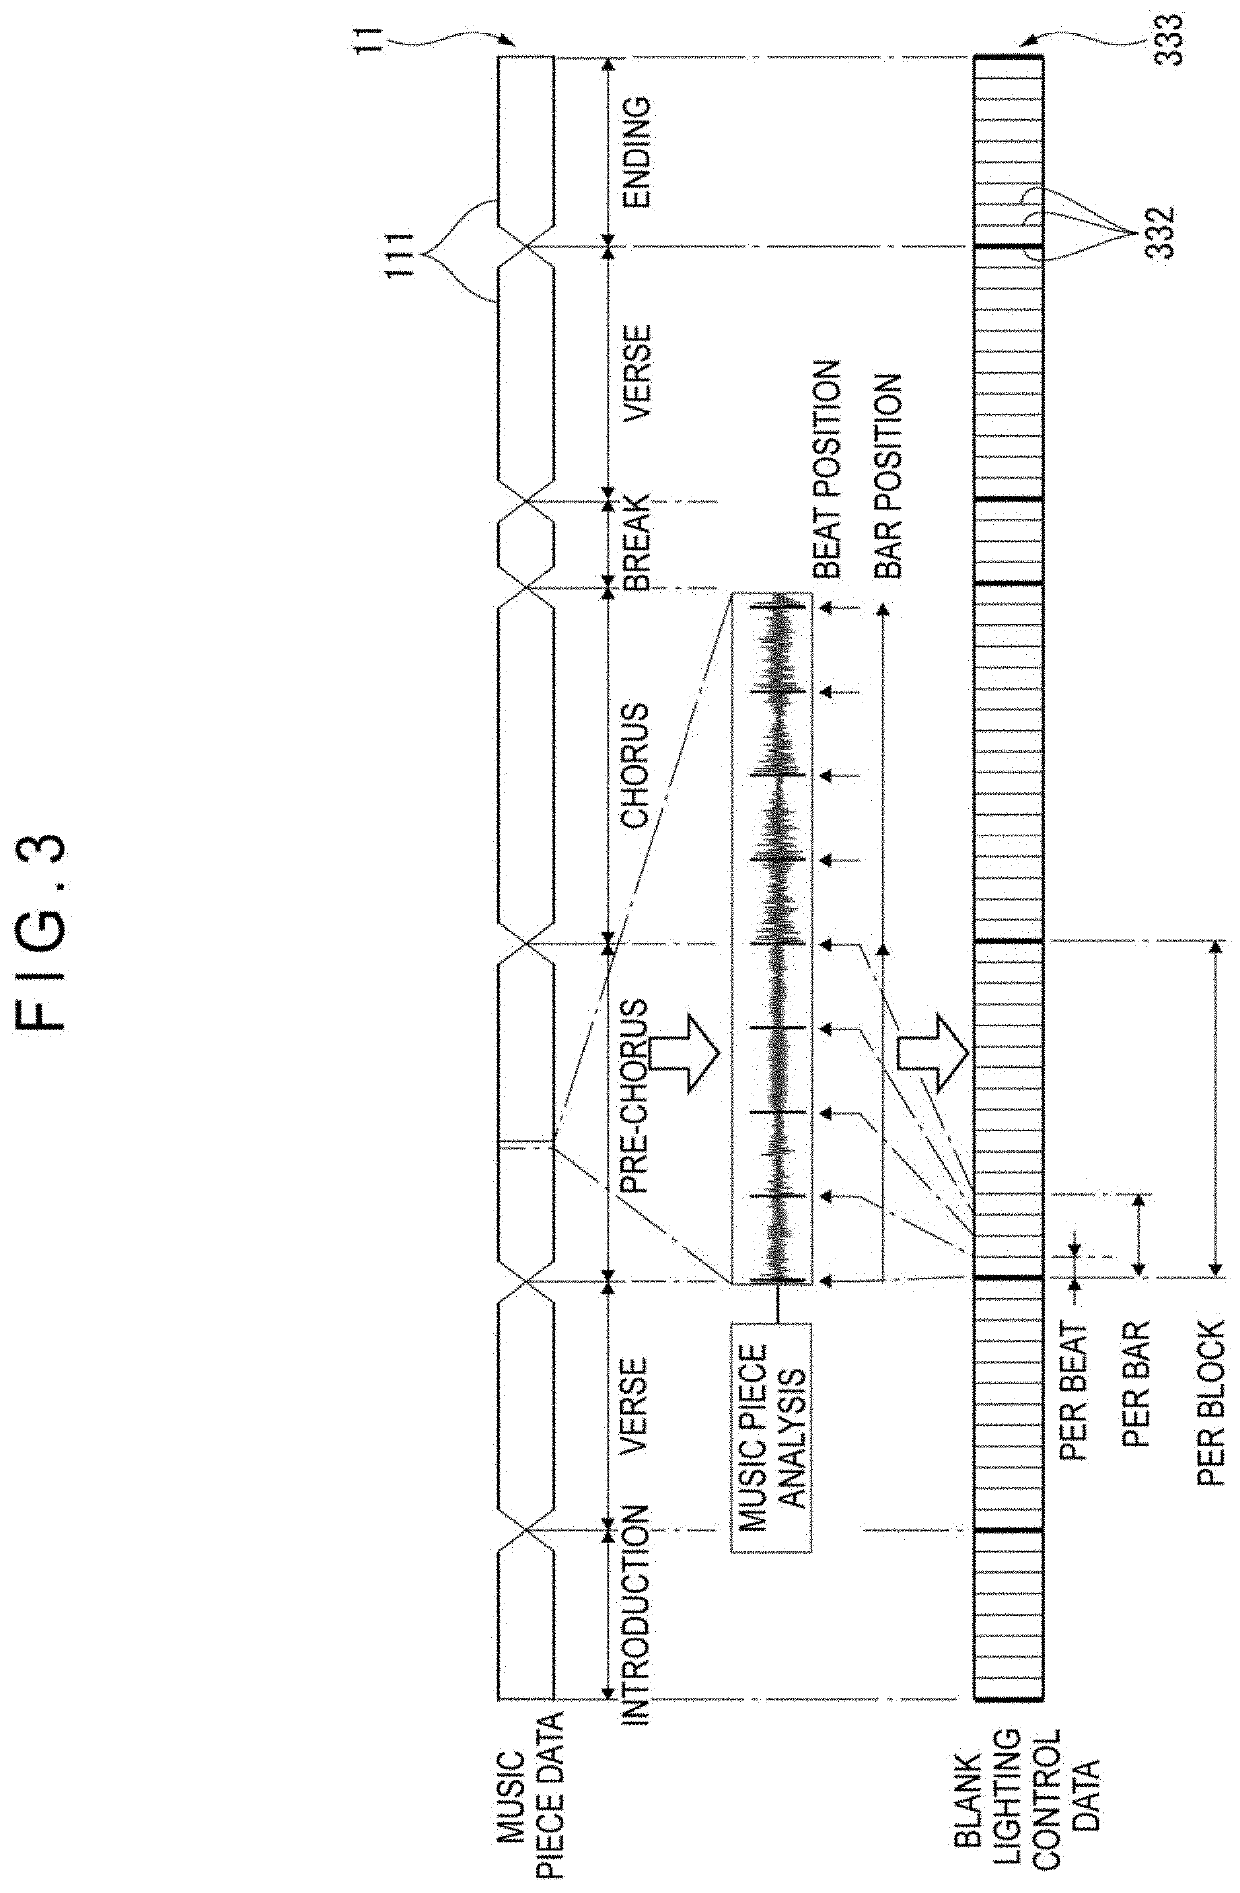 Light control device, lighting control method, and lighting control program for controlling lighting based on a beat position in a music piece information